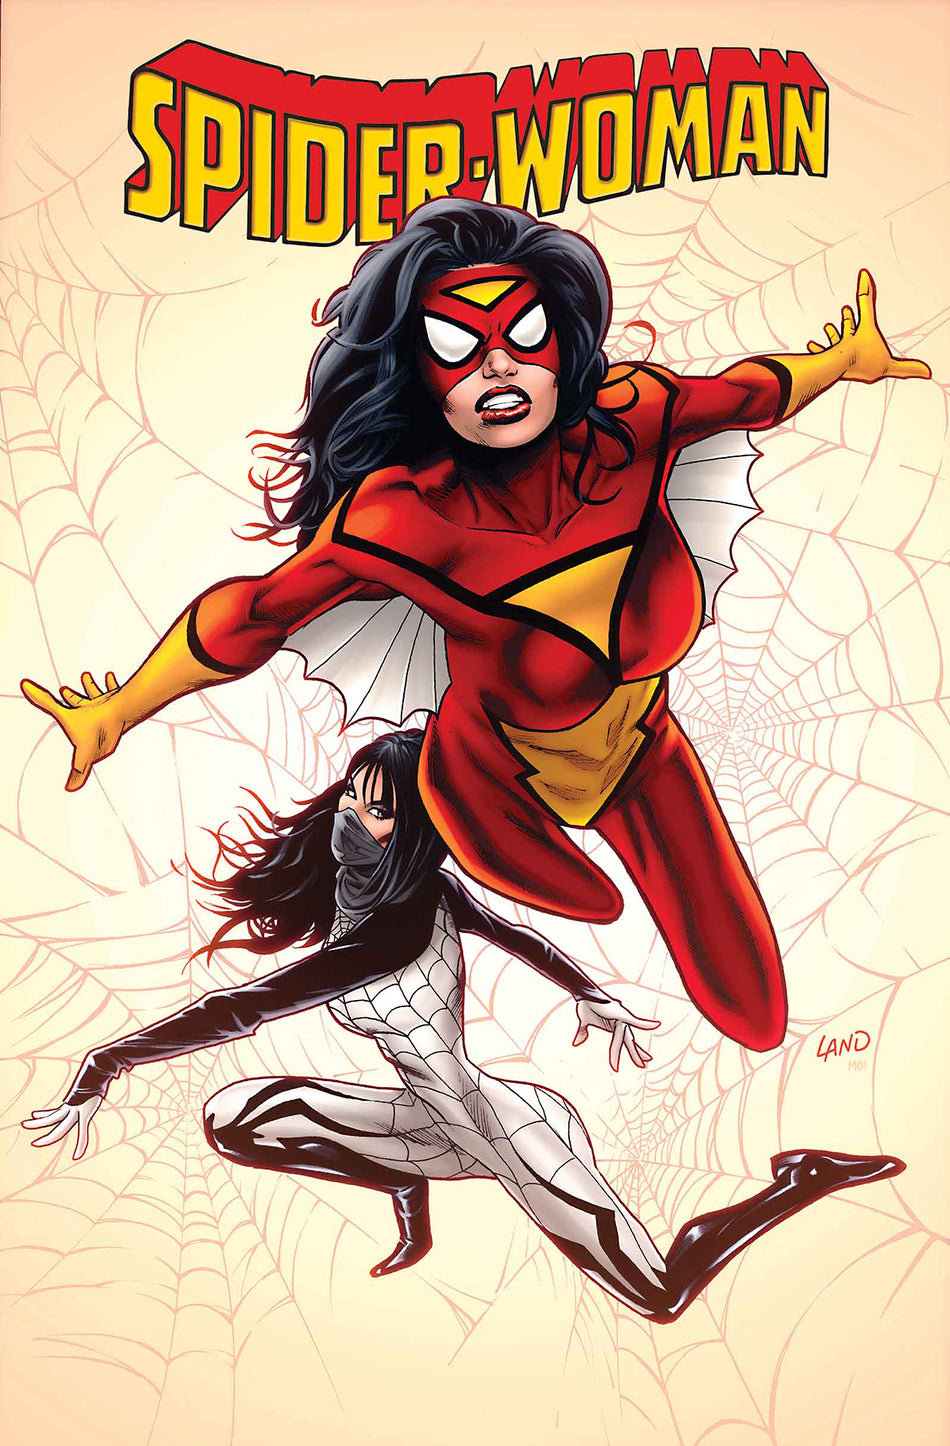 Photo of Spider-Woman Issue 1 Sv comic sold by Stronghold Collectibles